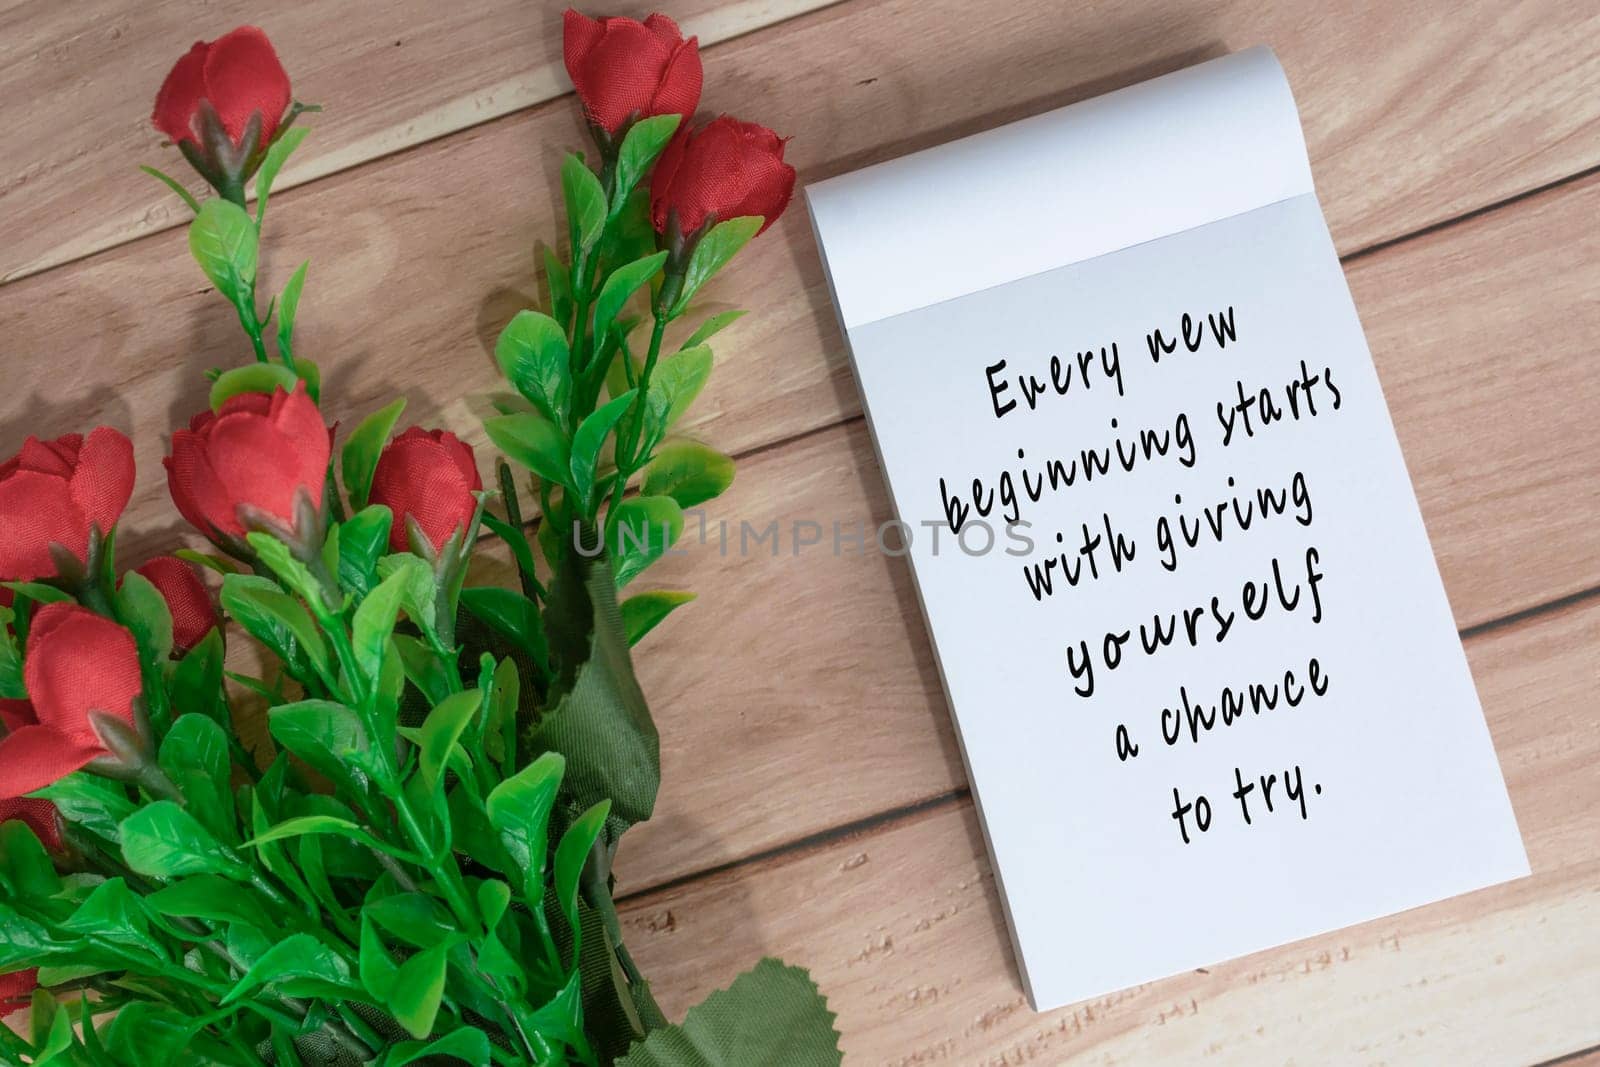 Motivational quote written on note book with artificial flowers on wooden desk - Every new beginning starts with giving yourself a chance to try.